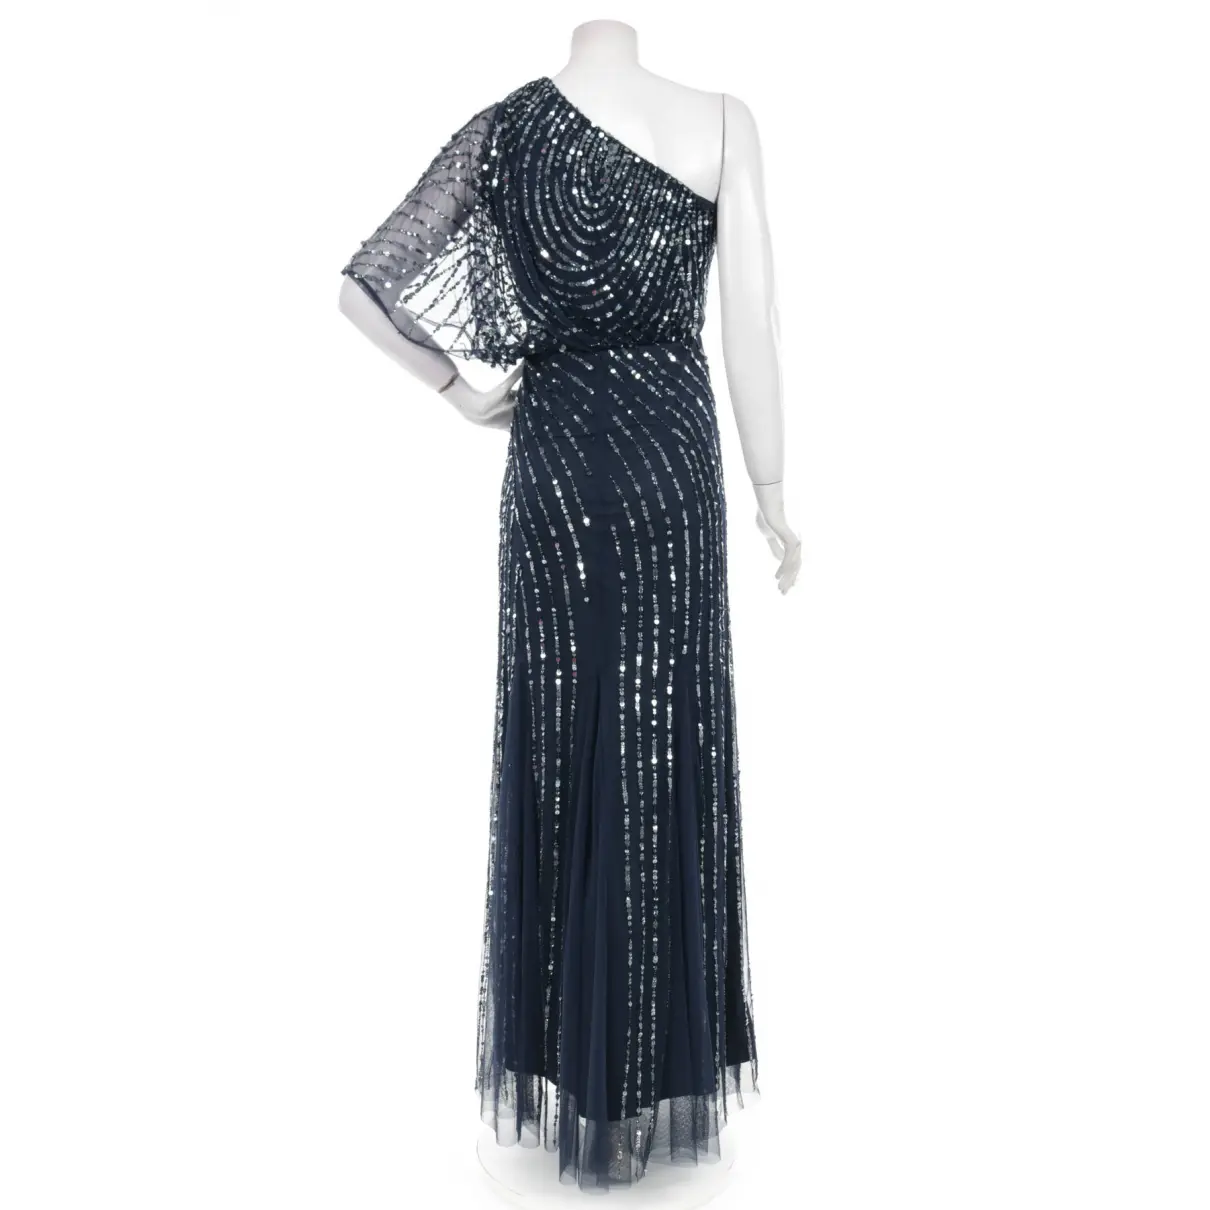 Buy Lace and Beads Maxi dress online